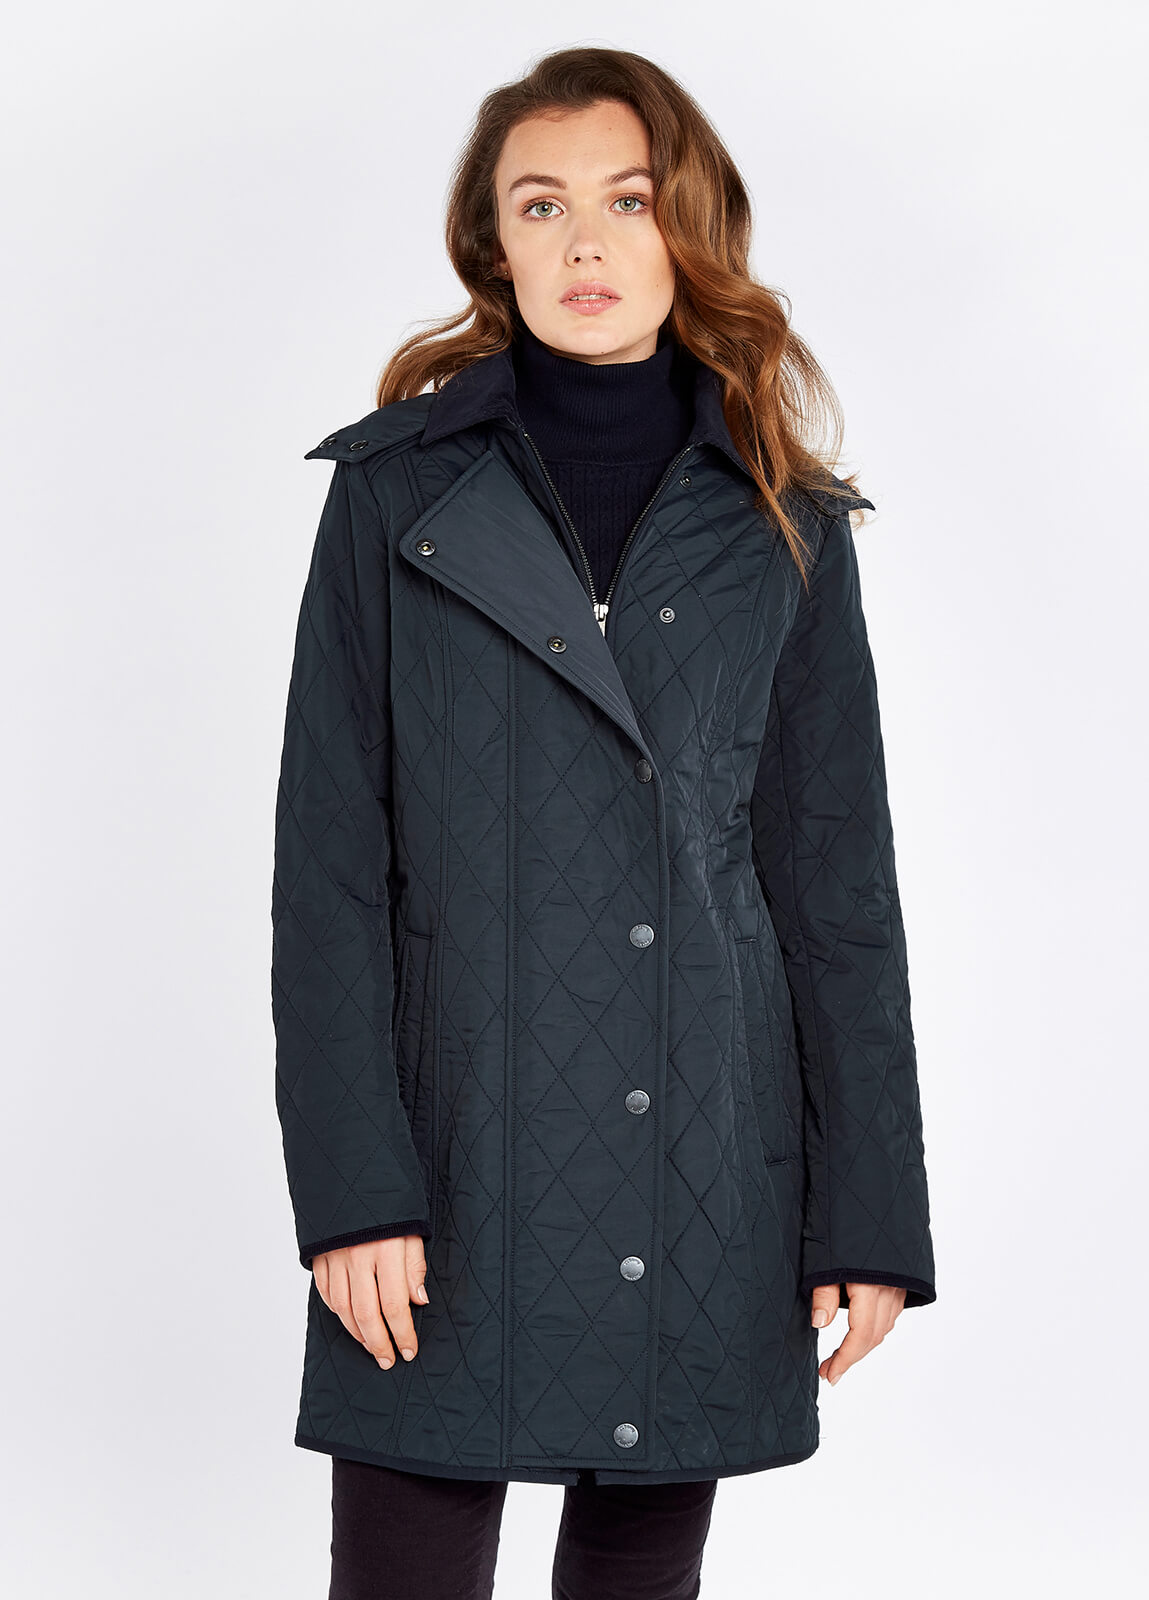 Jamestown Quilted Jacket | Dubarry USA